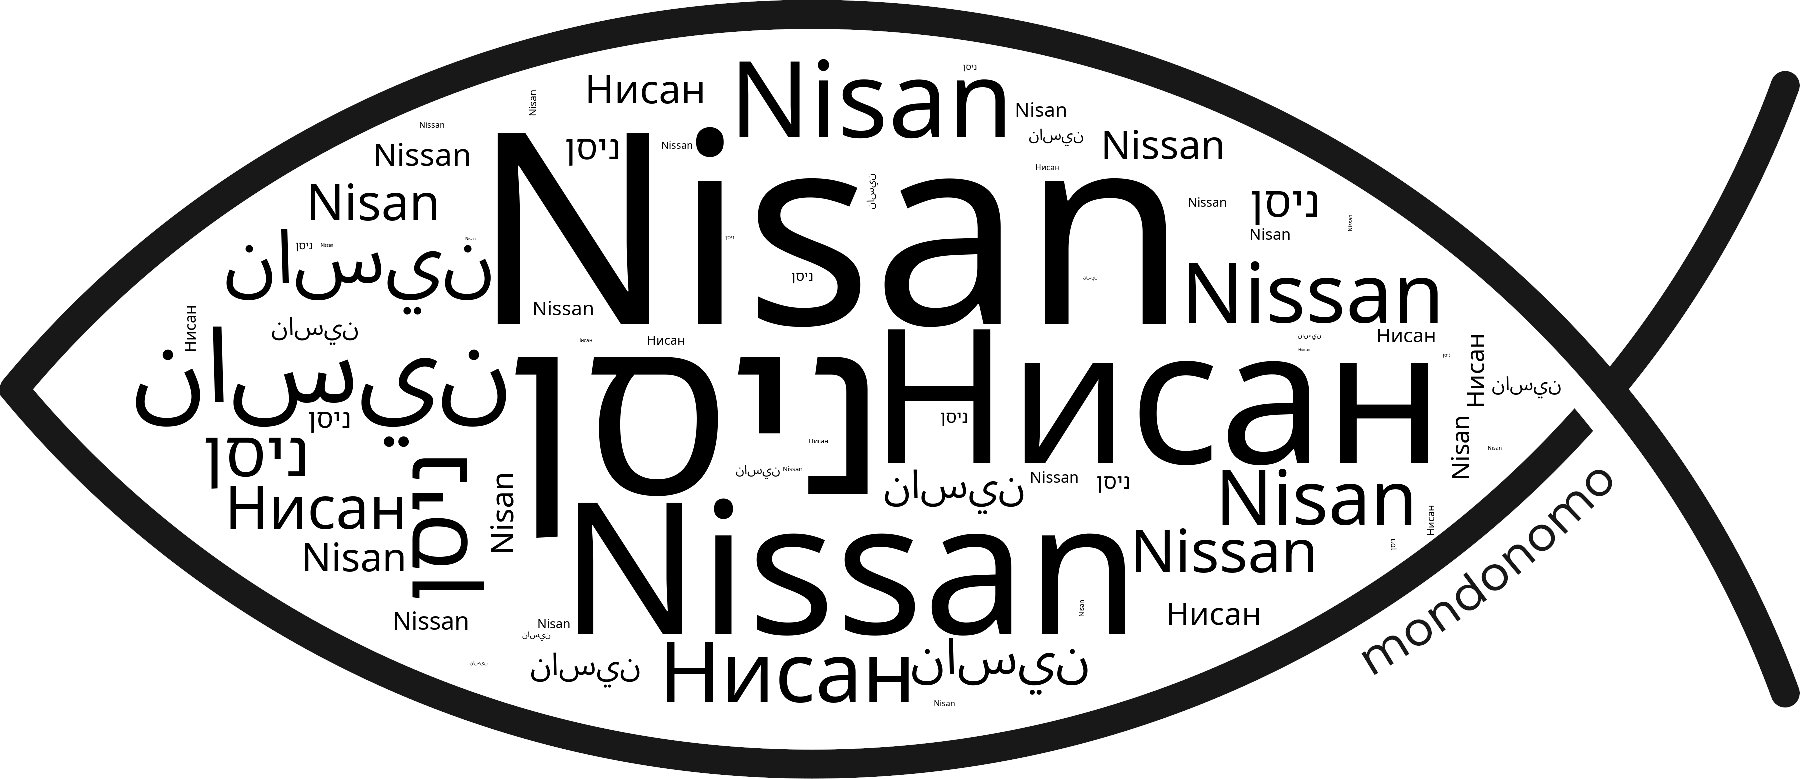 Name Nisan in the world's Bibles